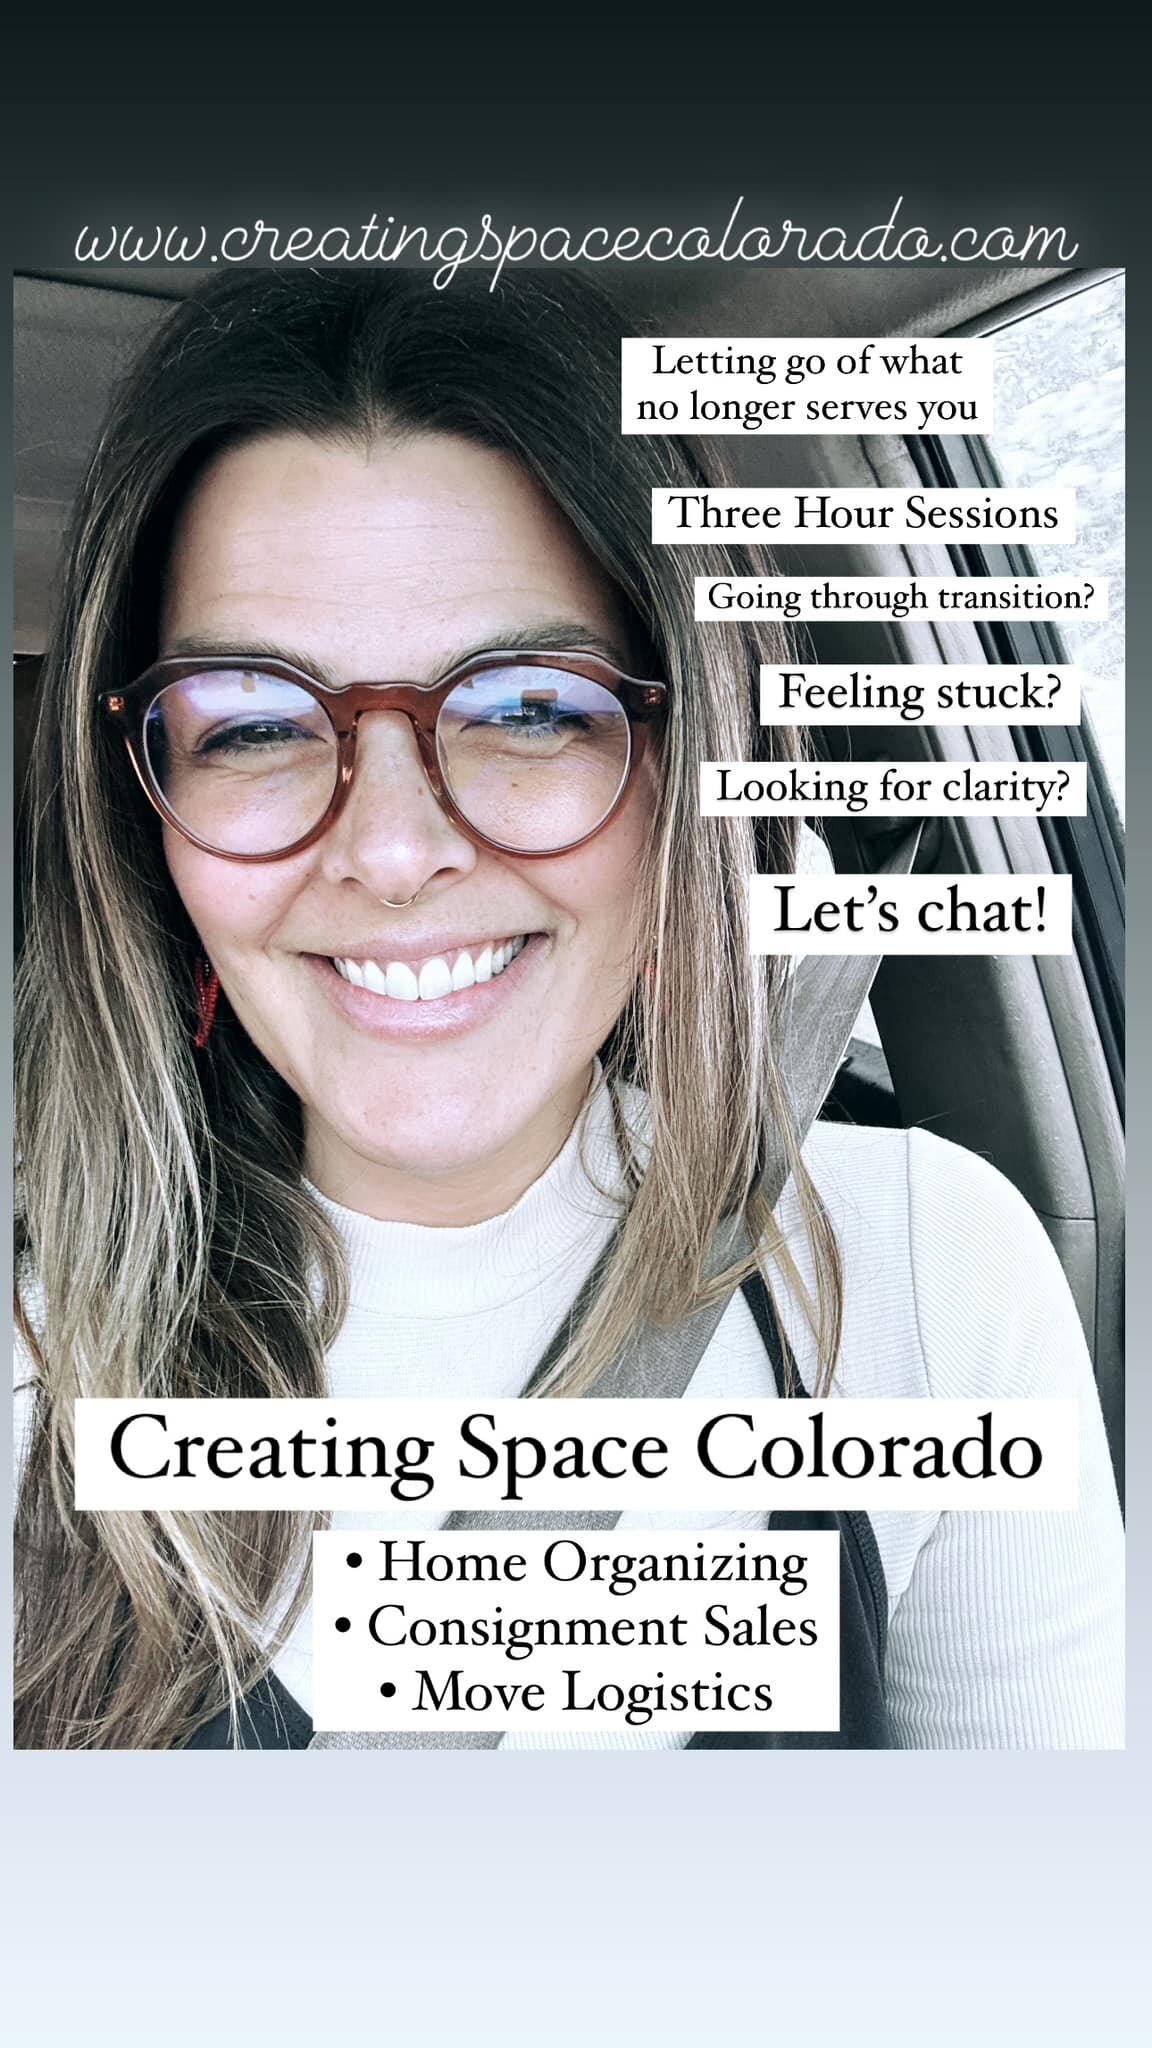 It&rsquo;s in the air&hellip; Are you ready??💫

www.creatingspacecolorado.com

#lettinggo #holdingon #transition #intention #clarity